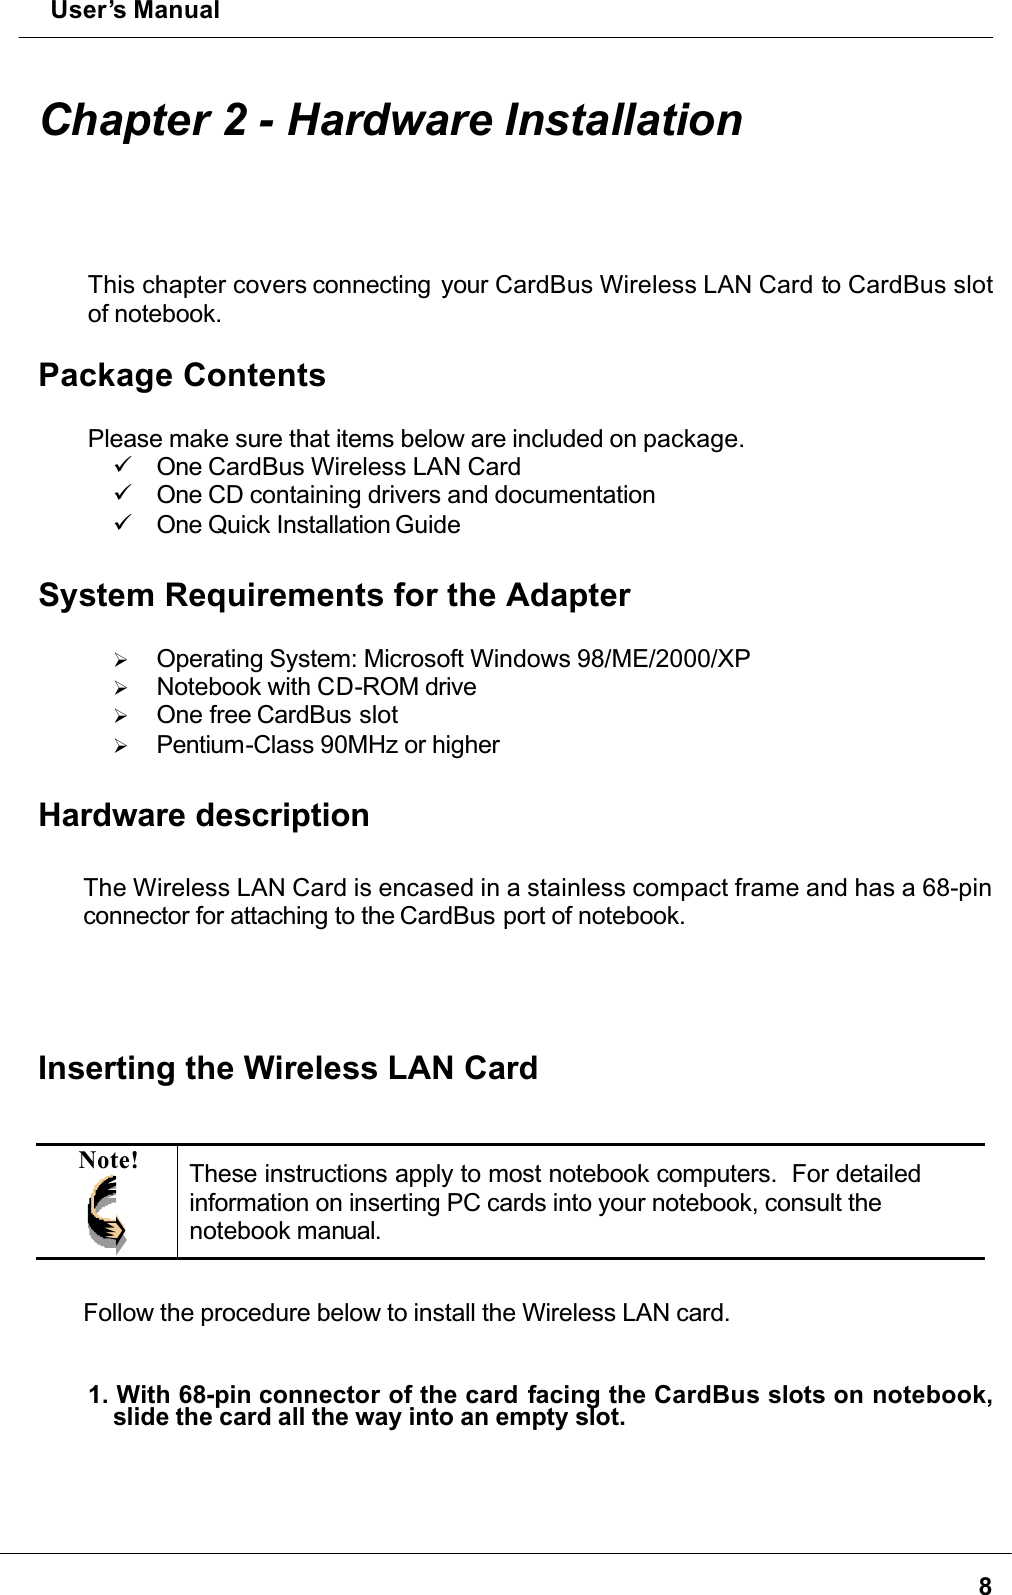  User’s Manual8Chapter 2 - Hardware InstallationThis chapter covers connecting  your CardBus Wireless LAN Card to CardBus slot of notebook.Package ContentsPlease make sure that items below are included on package. One CardBus Wireless LAN Card One CD containing drivers and documentation One Quick Installation GuideSystem Requirements for the Adapter  Operating System: Microsoft Windows 98/ME/2000/XP  Notebook with CD-ROM drive  One free CardBus slot  Pentium-Class 90MHz or higherHardware descriptionThe Wireless LAN Card is encased in a stainless compact frame and has a 68-pinconnector for attaching to the CardBus port of notebook.Inserting the Wireless LAN CardNote! These instructions apply to most notebook computers.  For detailed information on inserting PC cards into your notebook, consult the notebook manual.Follow the procedure below to install the Wireless LAN card.1. With 68-pin connector of the card facing the CardBus slots on notebook,slide the card all the way into an empty slot. 